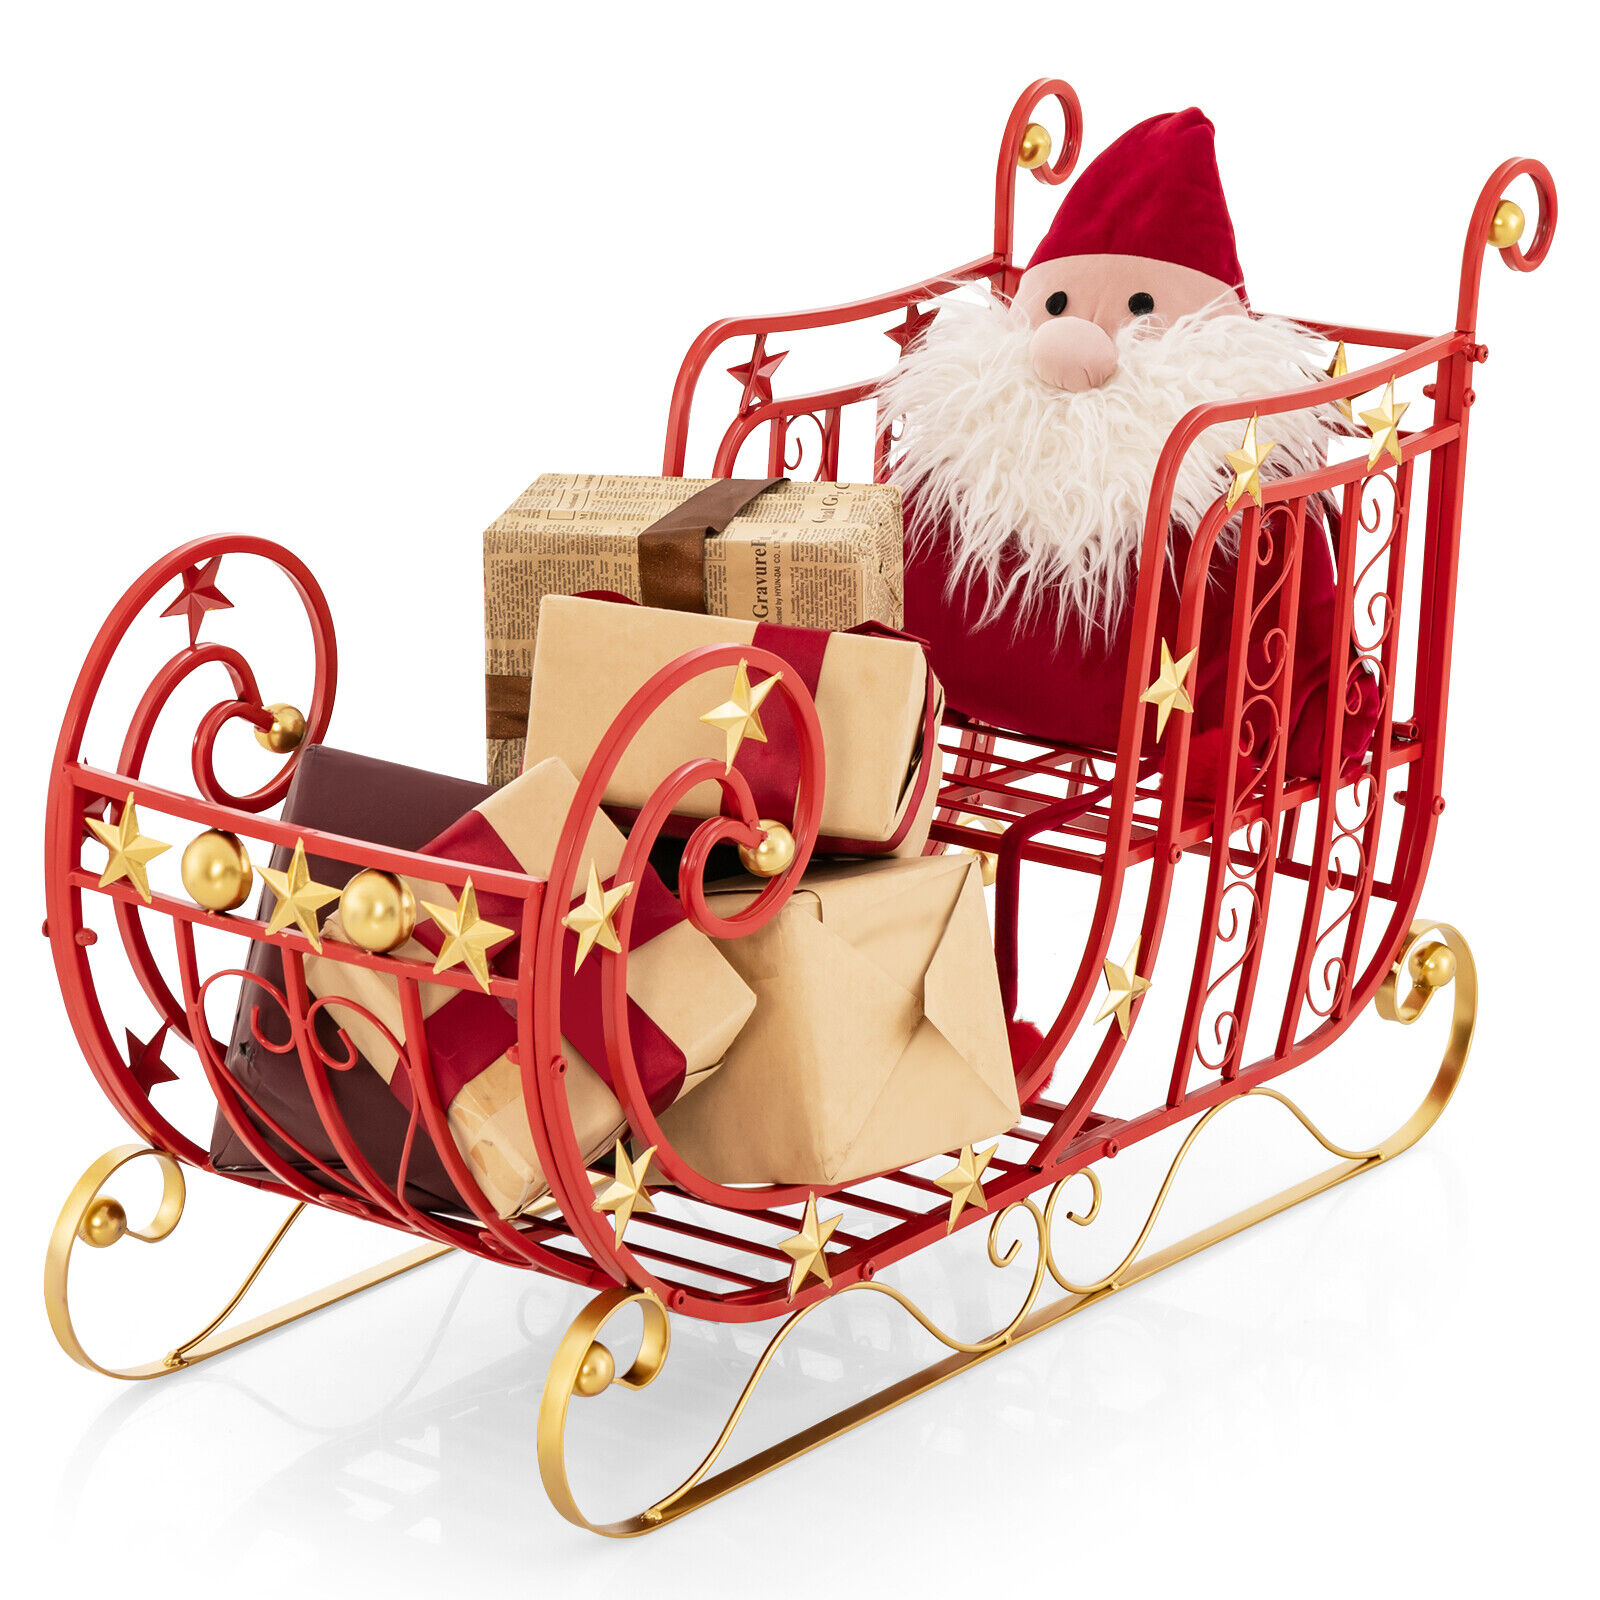 Great Choice Products Red Santa Sleigh W/ Large Cargo Area For Gifts Metal Christmas Holiday Decor